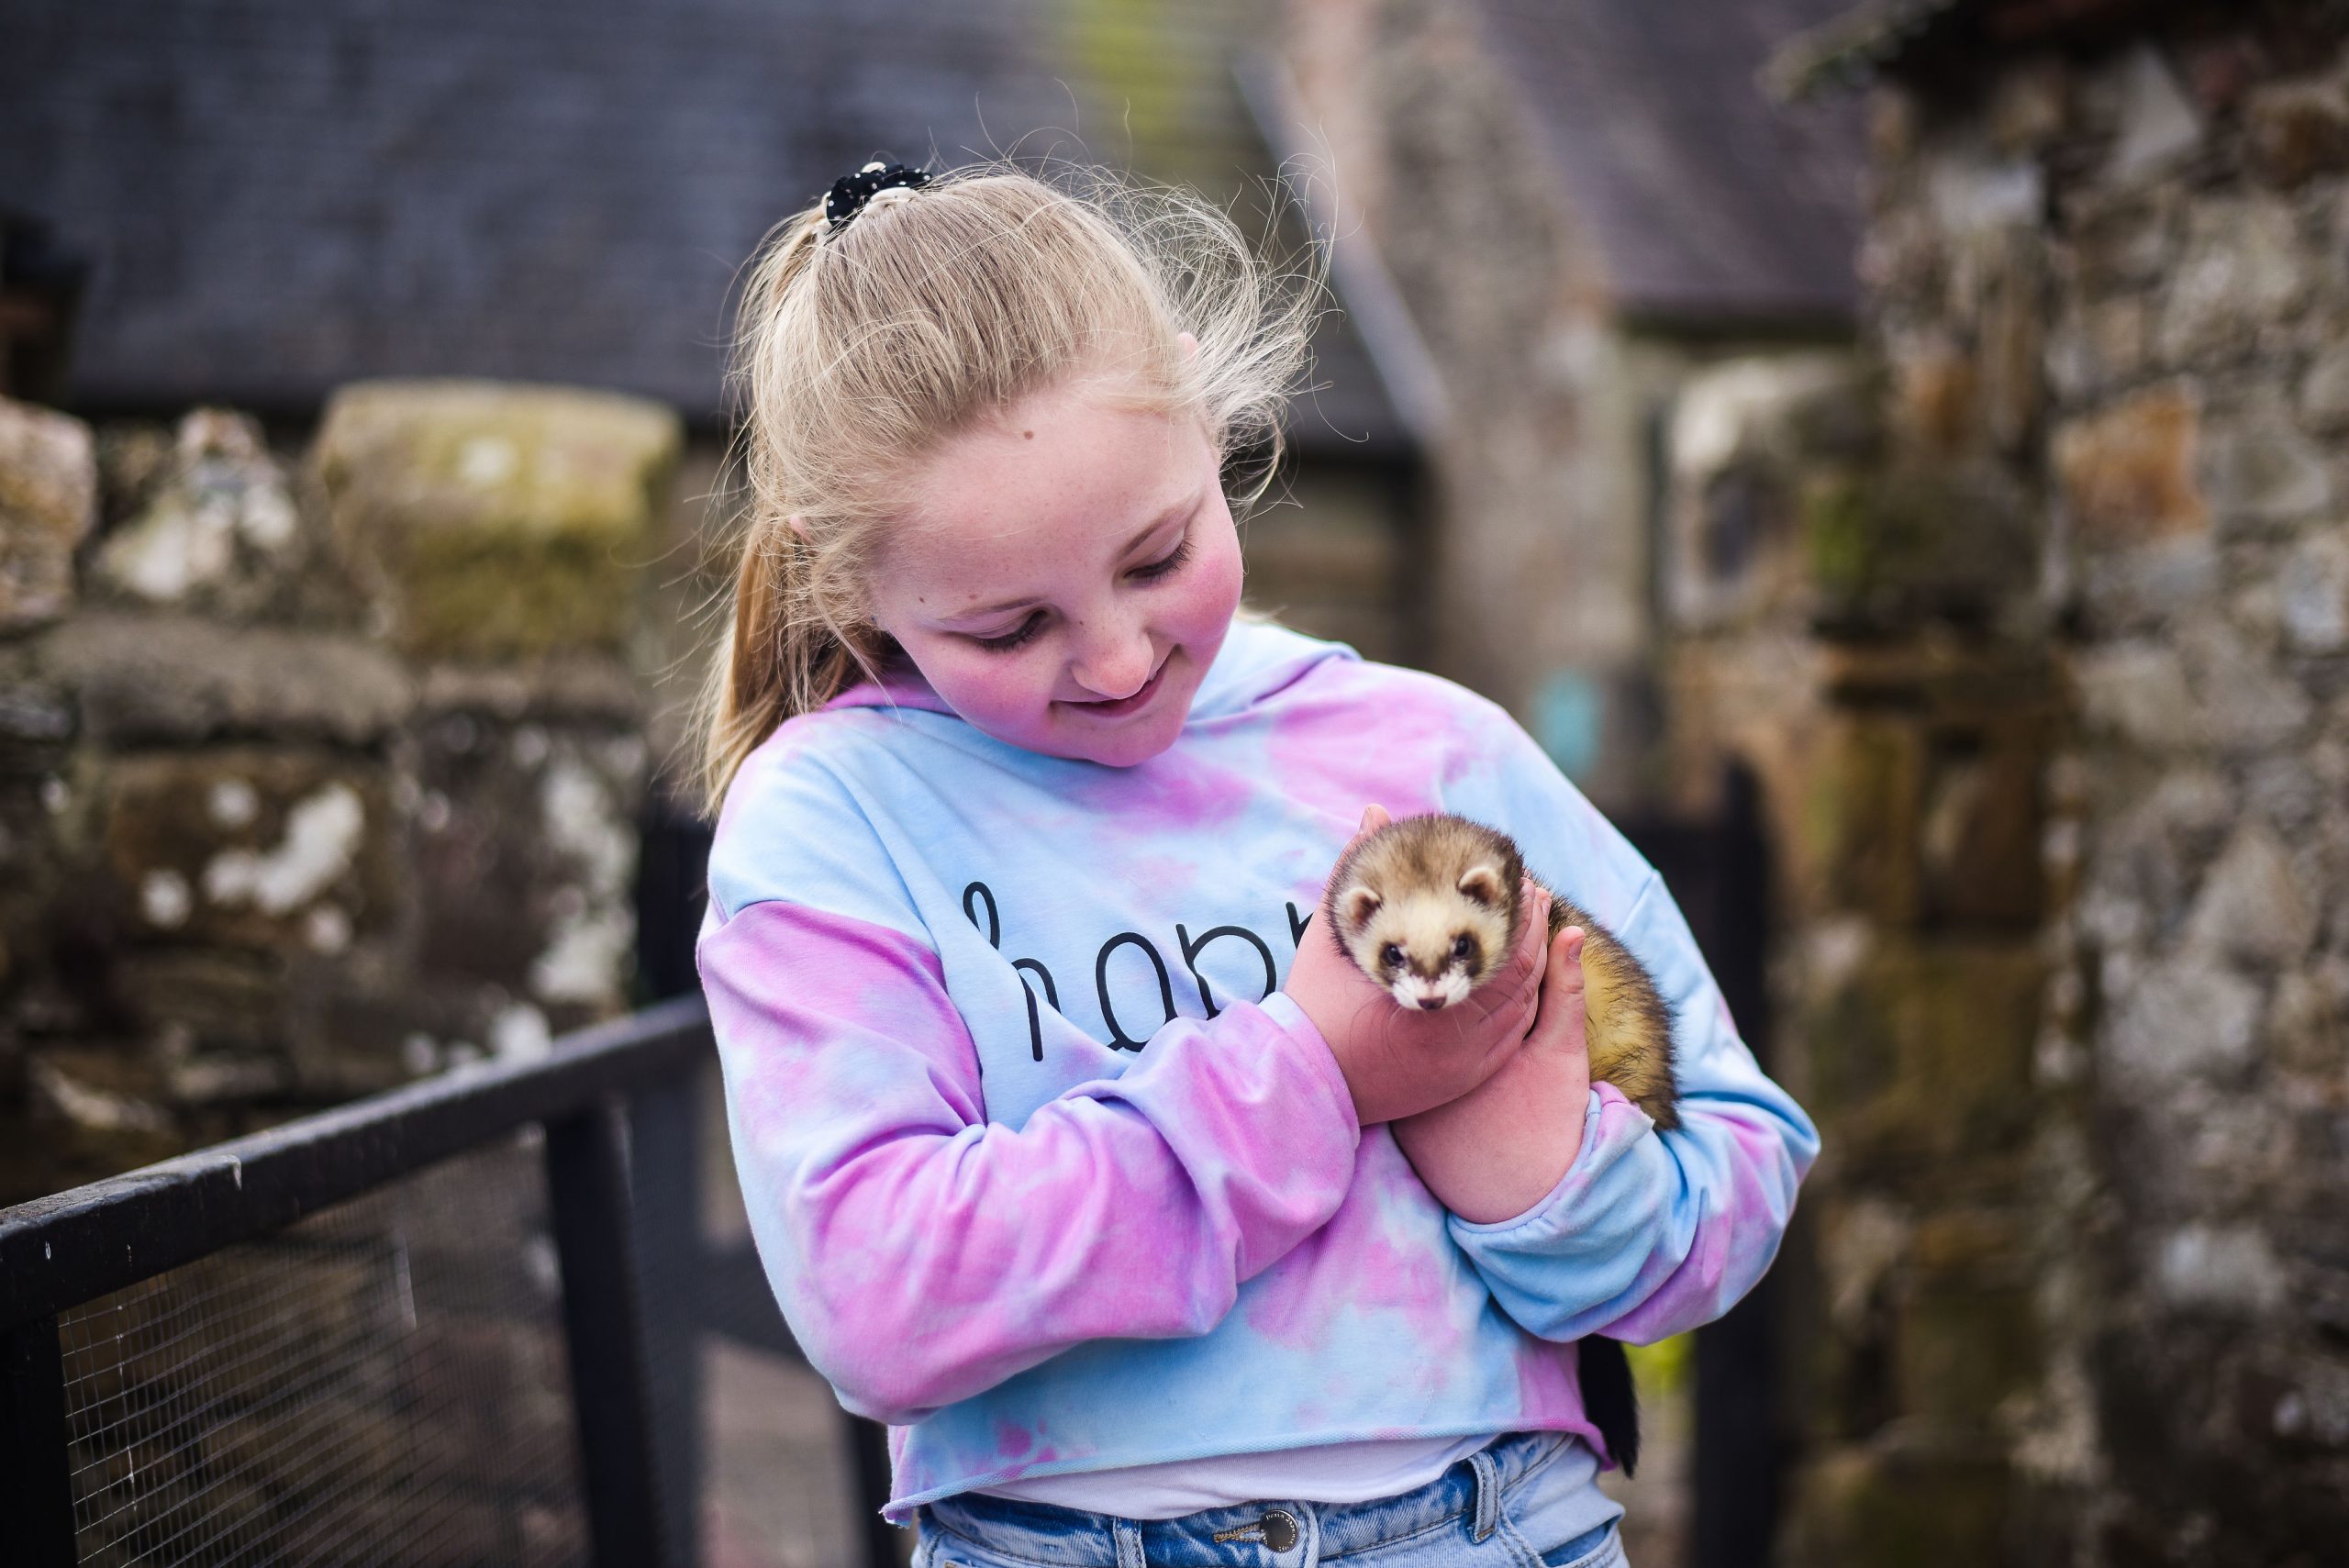 Little girl holding a fury animal